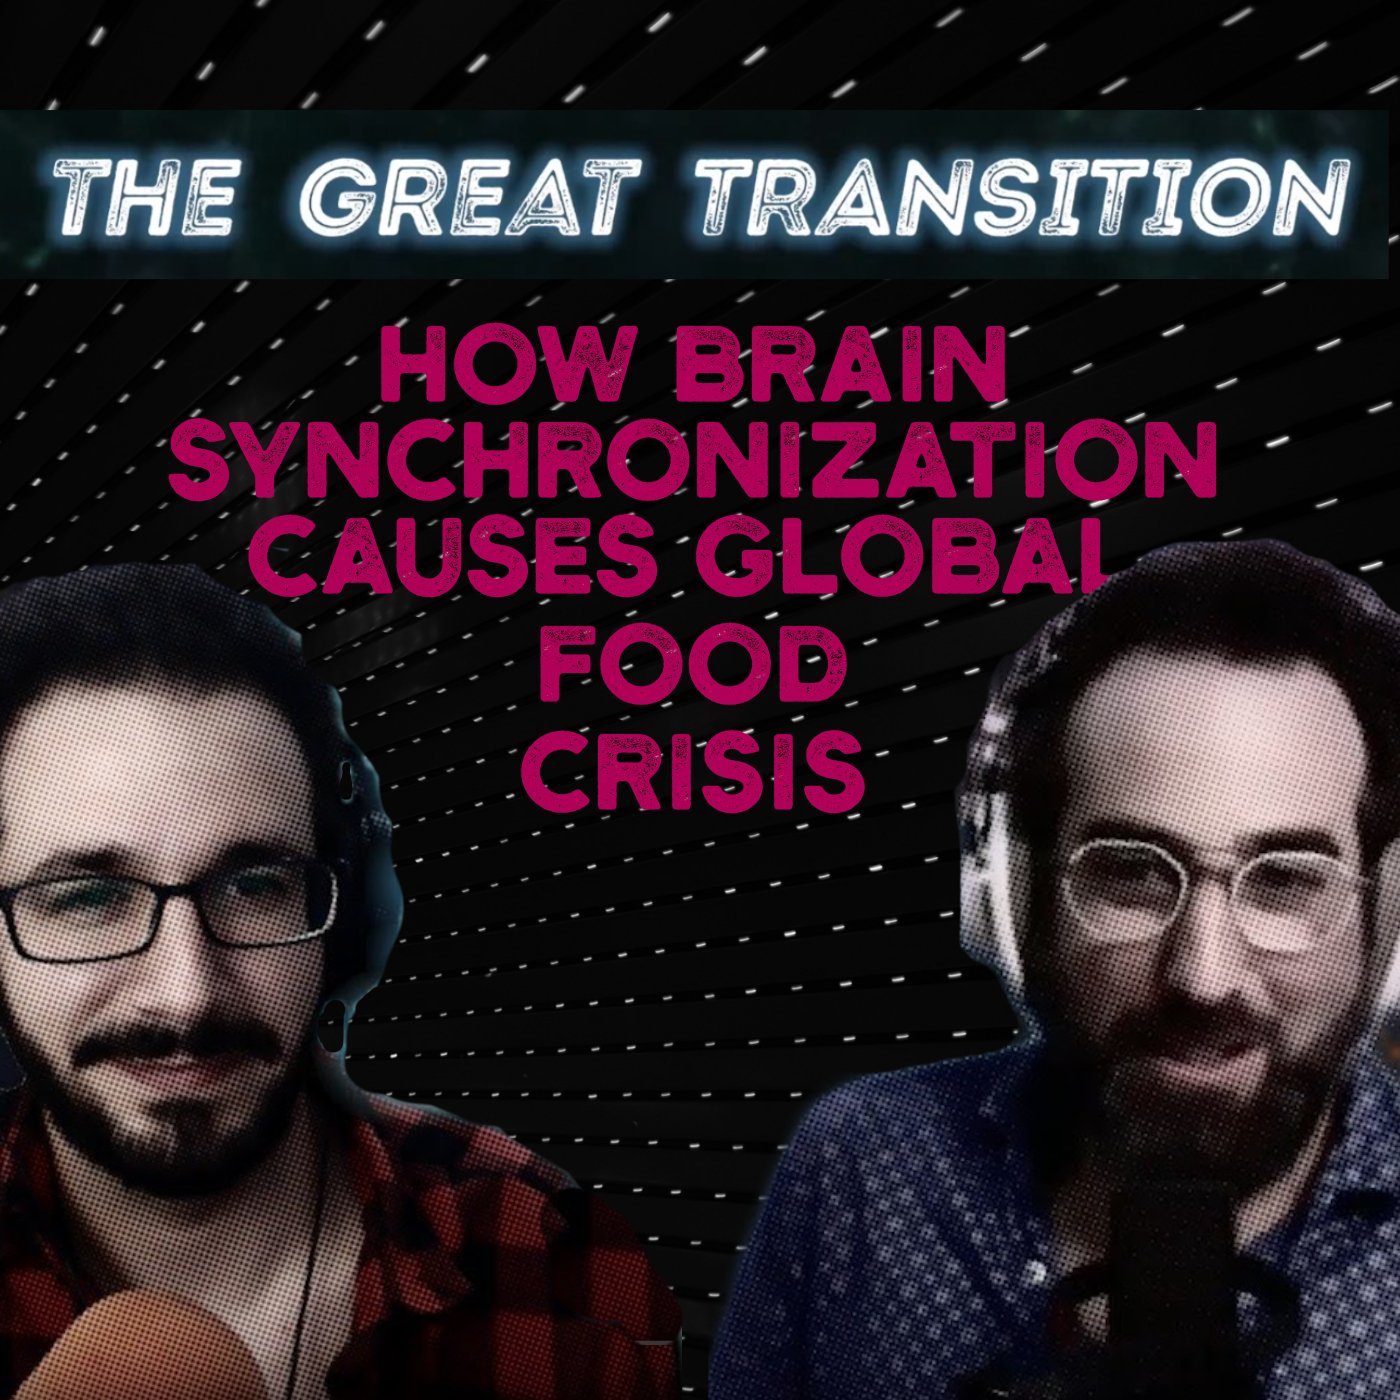 The Great Transition - How Brain Synchronization Causes Global Food Crisis